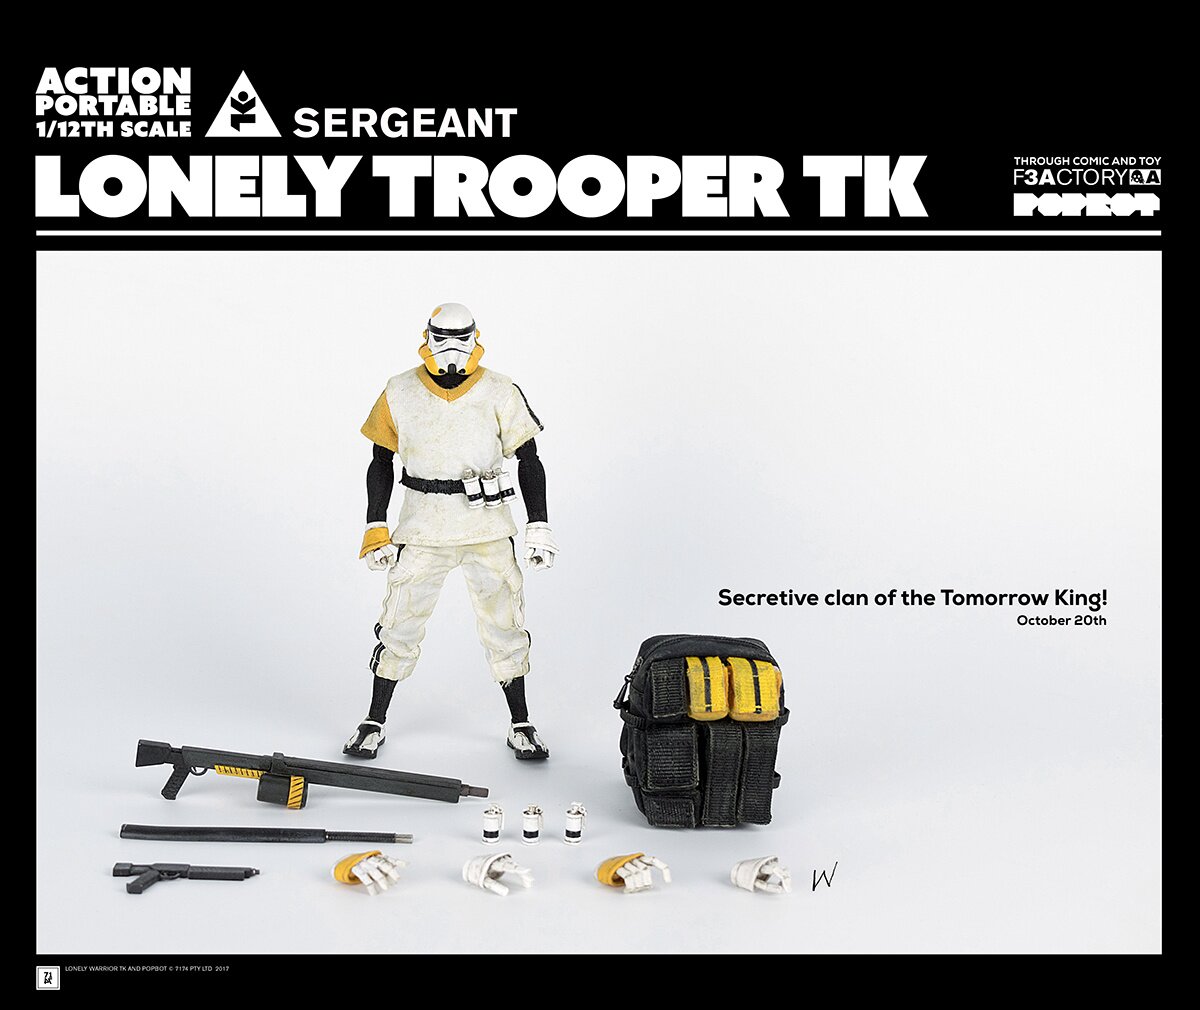 Action Portable 1/12 Scale Lonely Trooper TK Sergeant